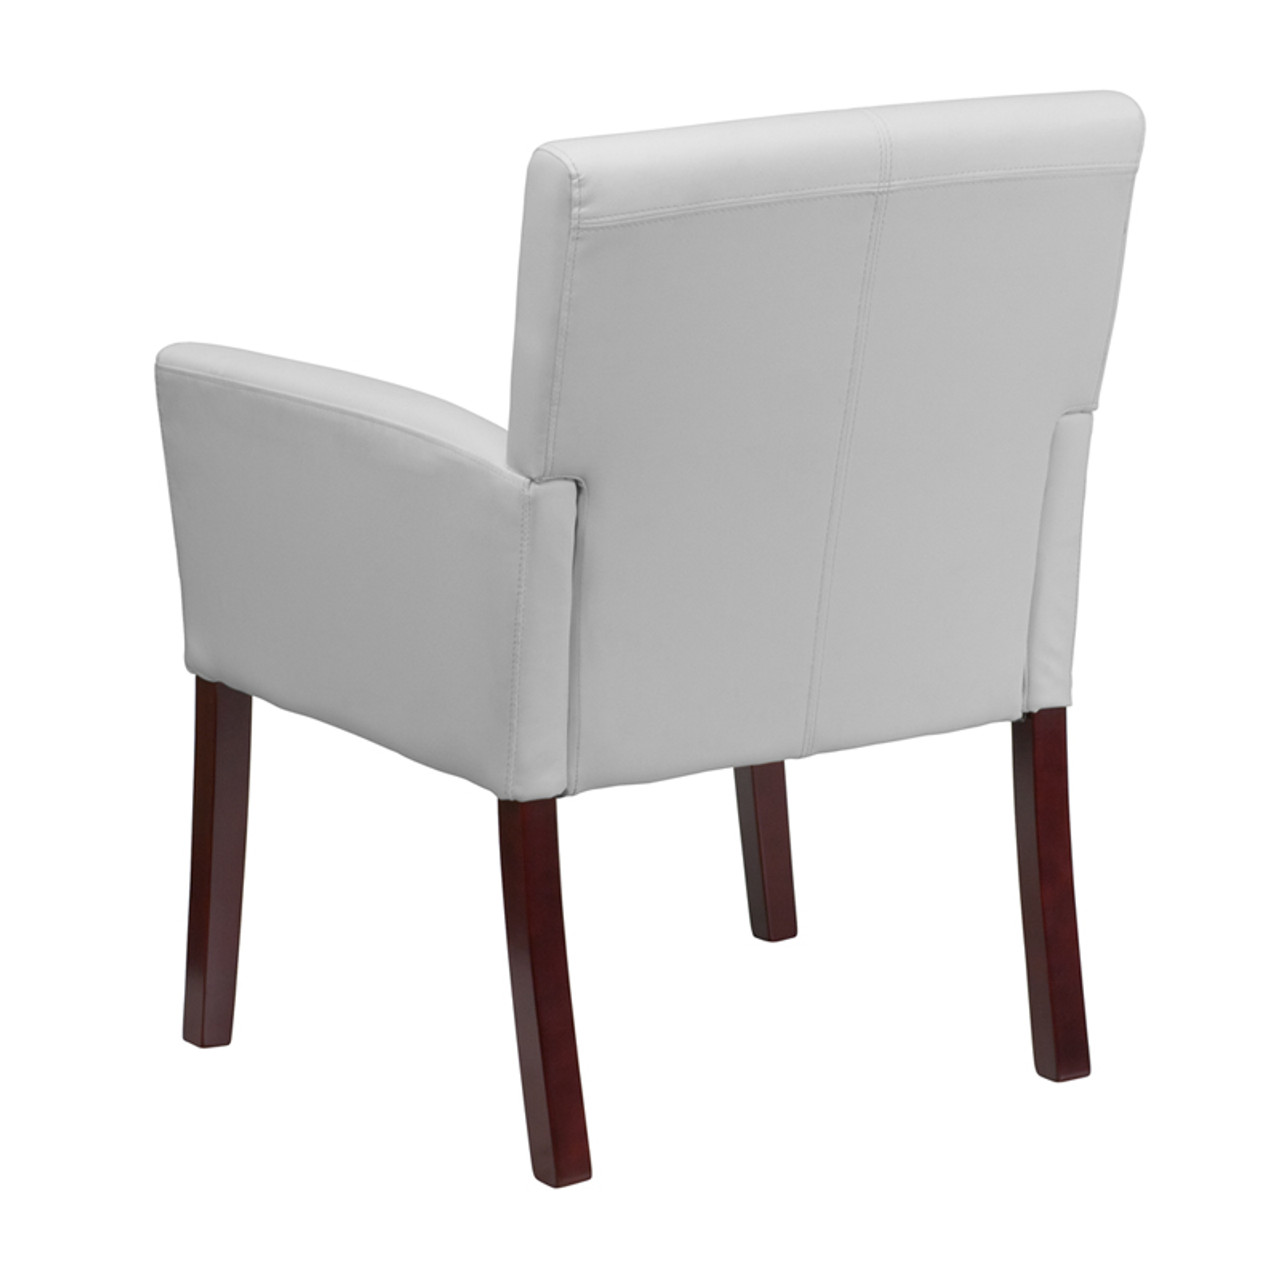 White Leather Executive Side Chair or Reception Chair with Mahogany Legs , #FF-0453-14